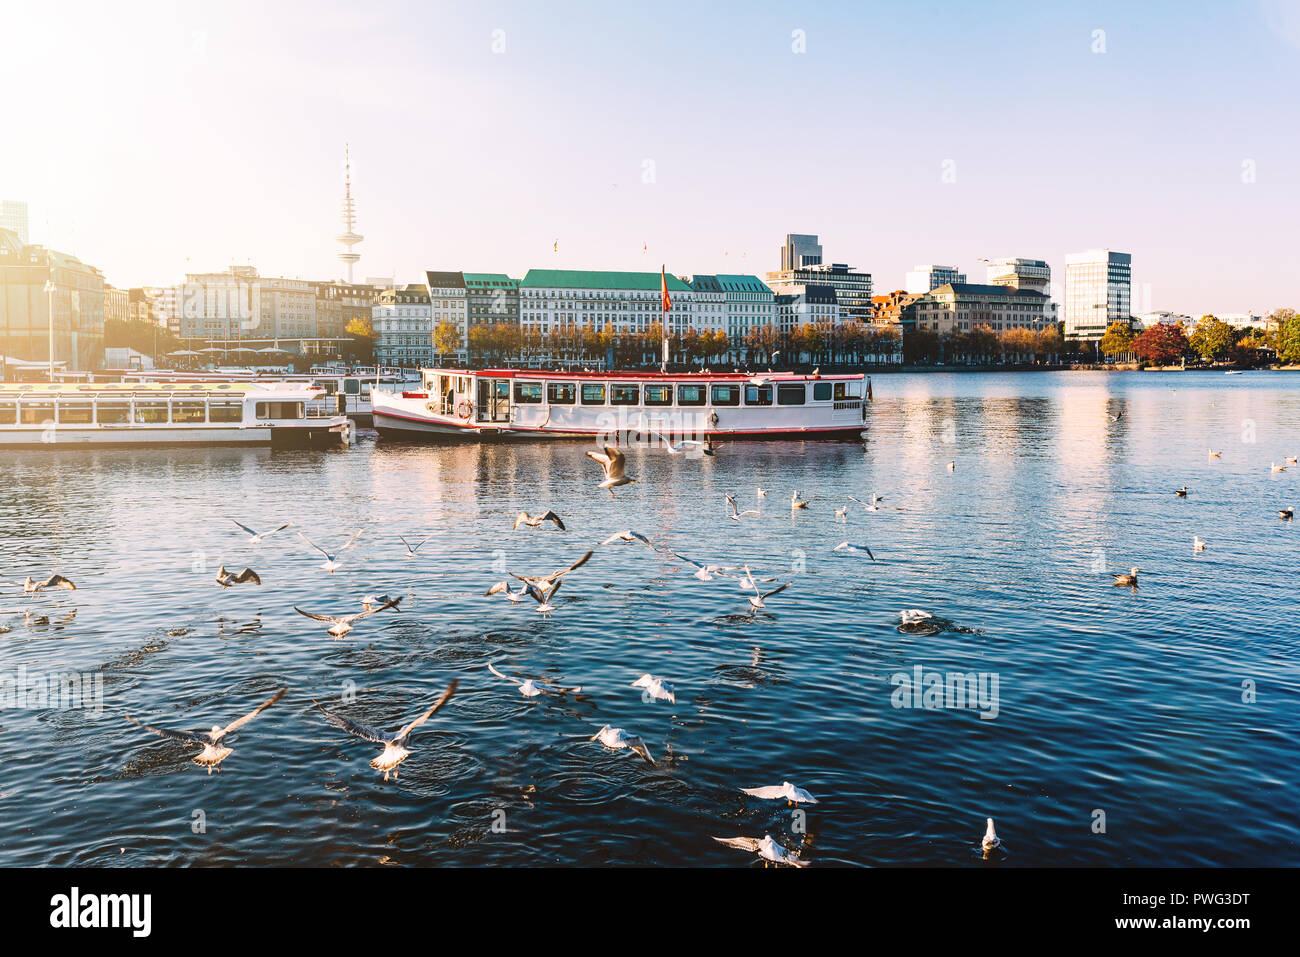 seagulls and passenger crafts on Alster Lake in Hamburg Stock Photo